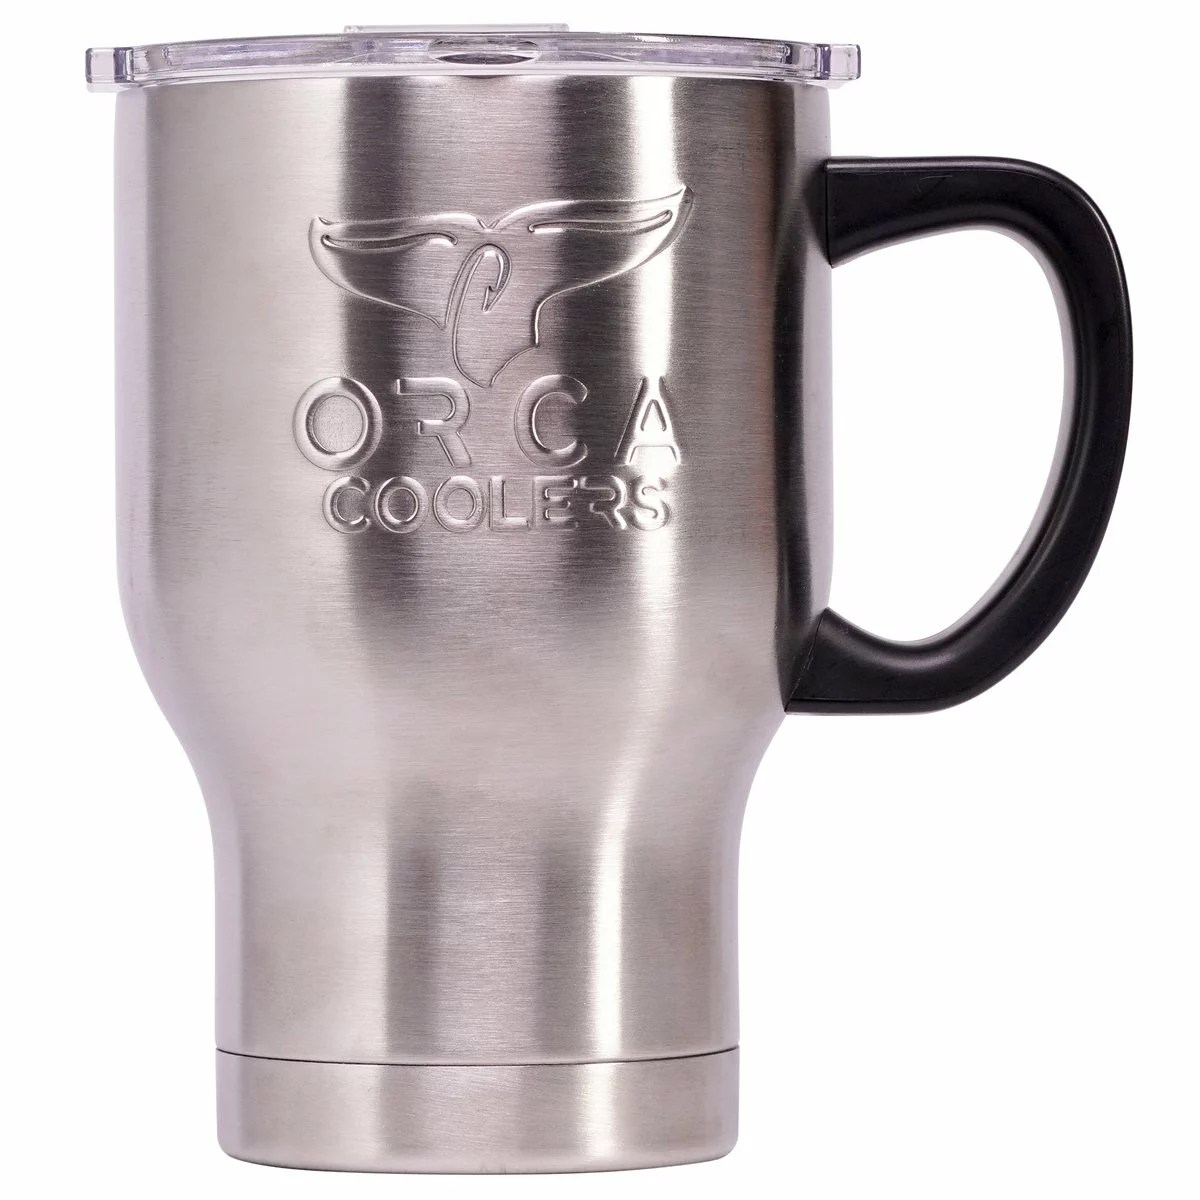 30 oz. Orca Stainless Steel Travel Tumbler - Silver